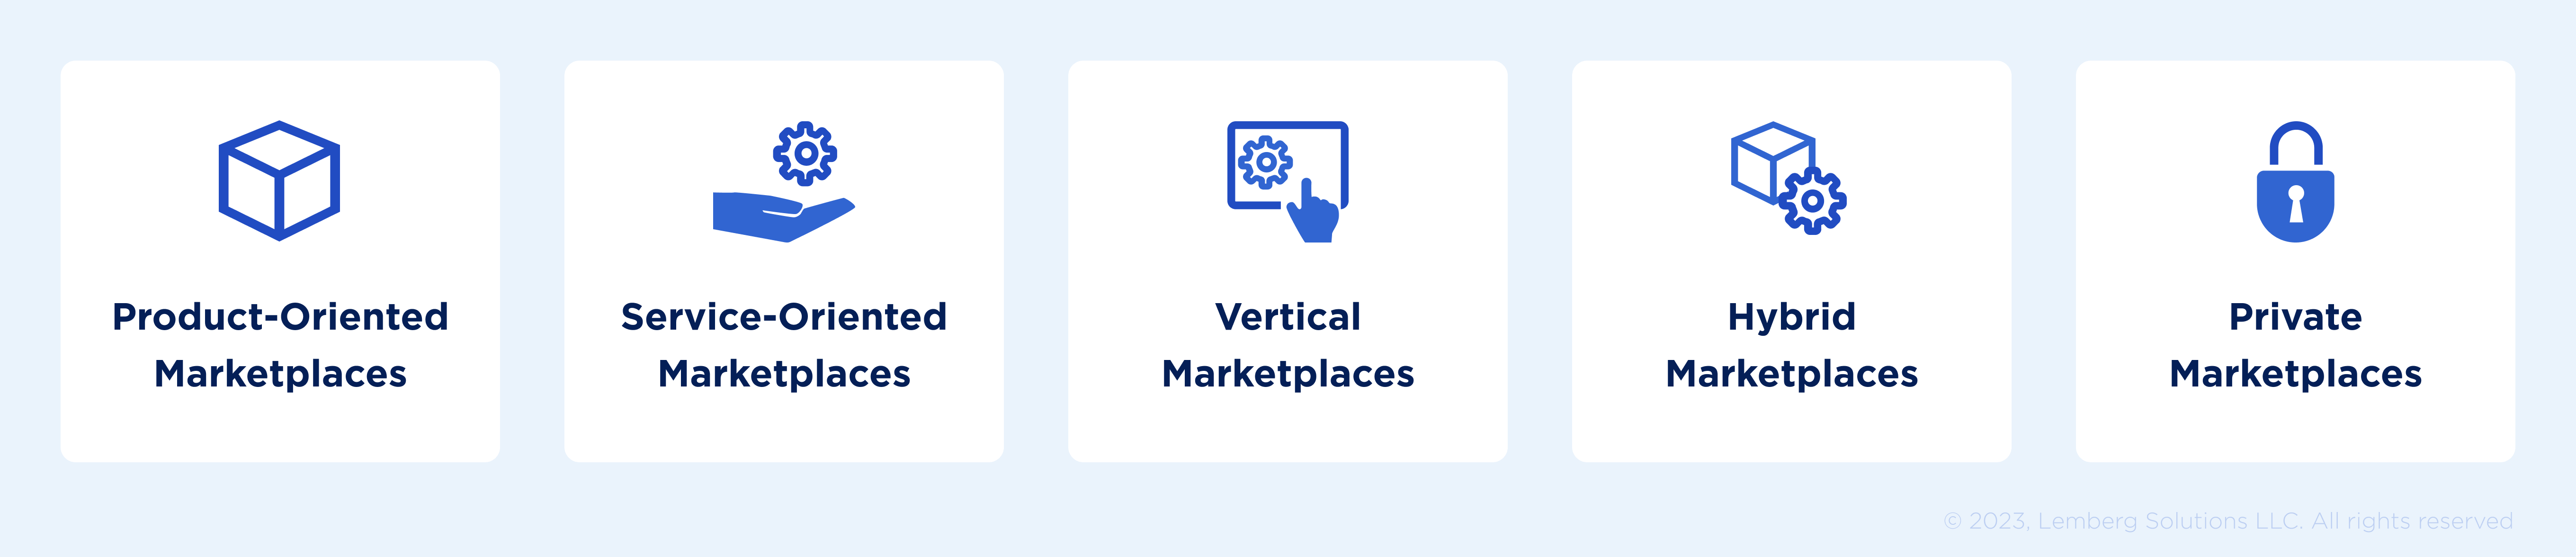 Types of B2B Marketplaces - Lemberg Solutions